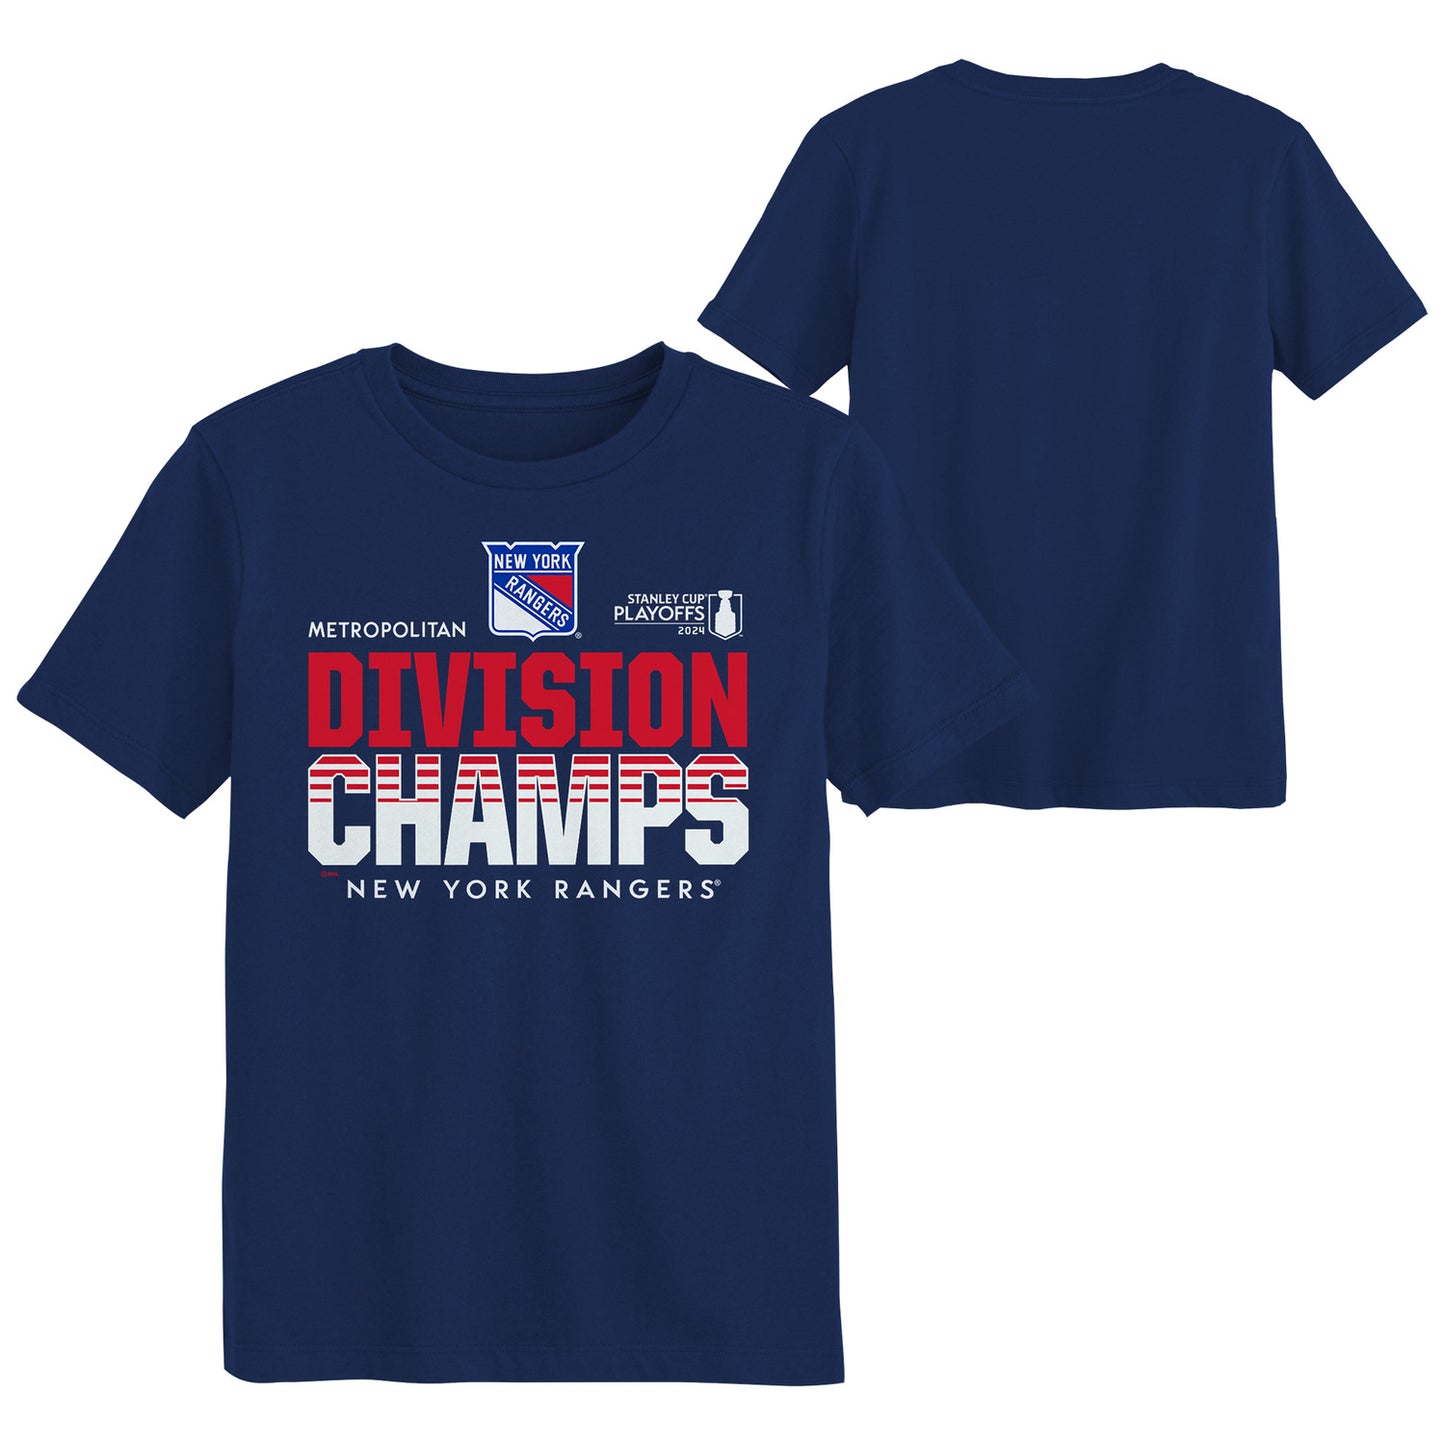 Youth Rangers 23-24 Division Champs Tee